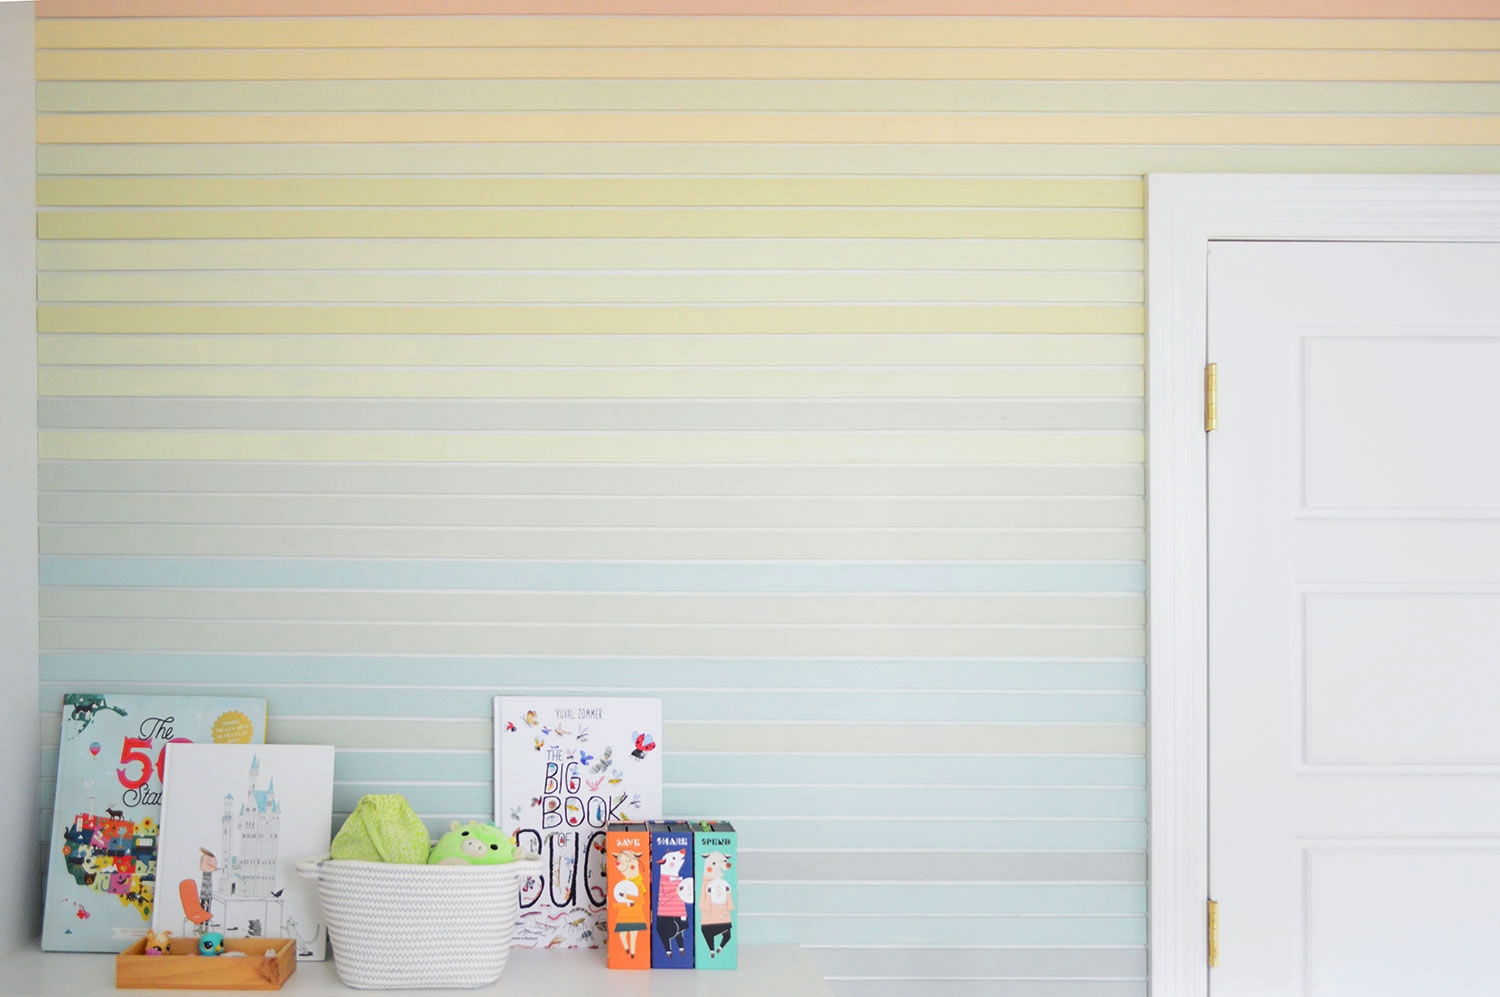 A Colorful Planked Wall Treatment For Our Son's Room